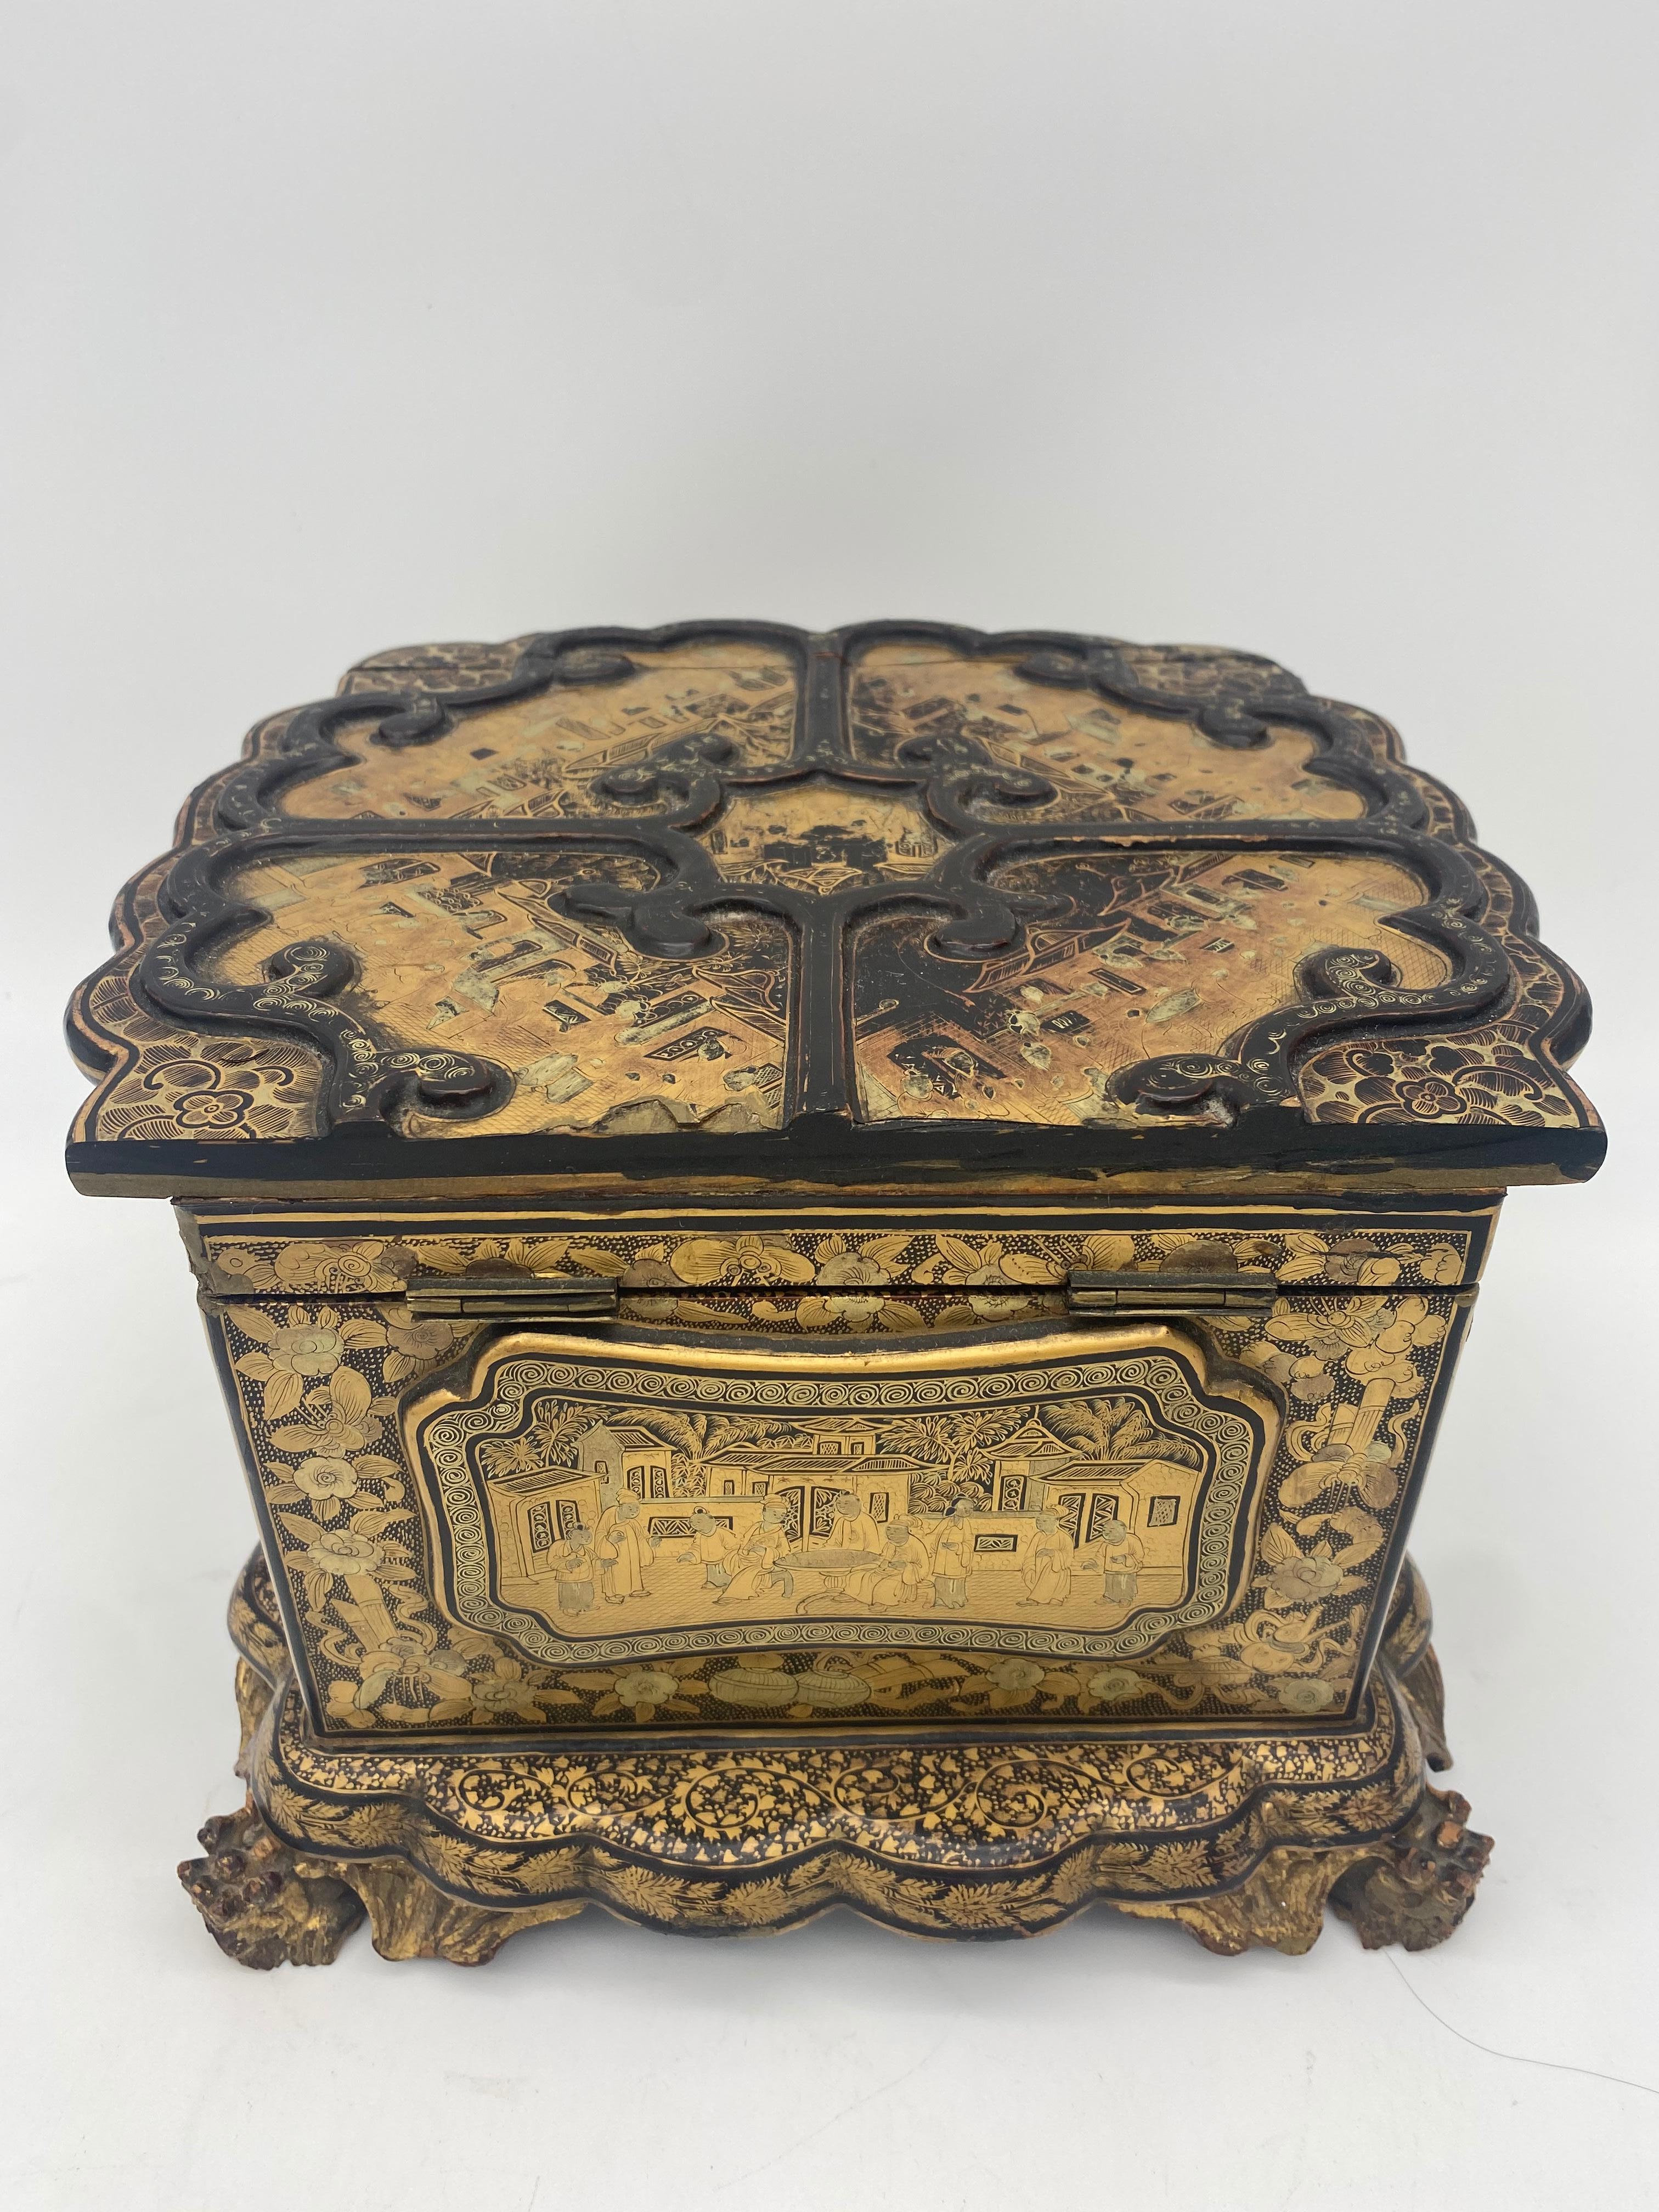 Qing Unique 19th Century  Export Chinese Gilt Chinoiserie Lacquer Box For Sale